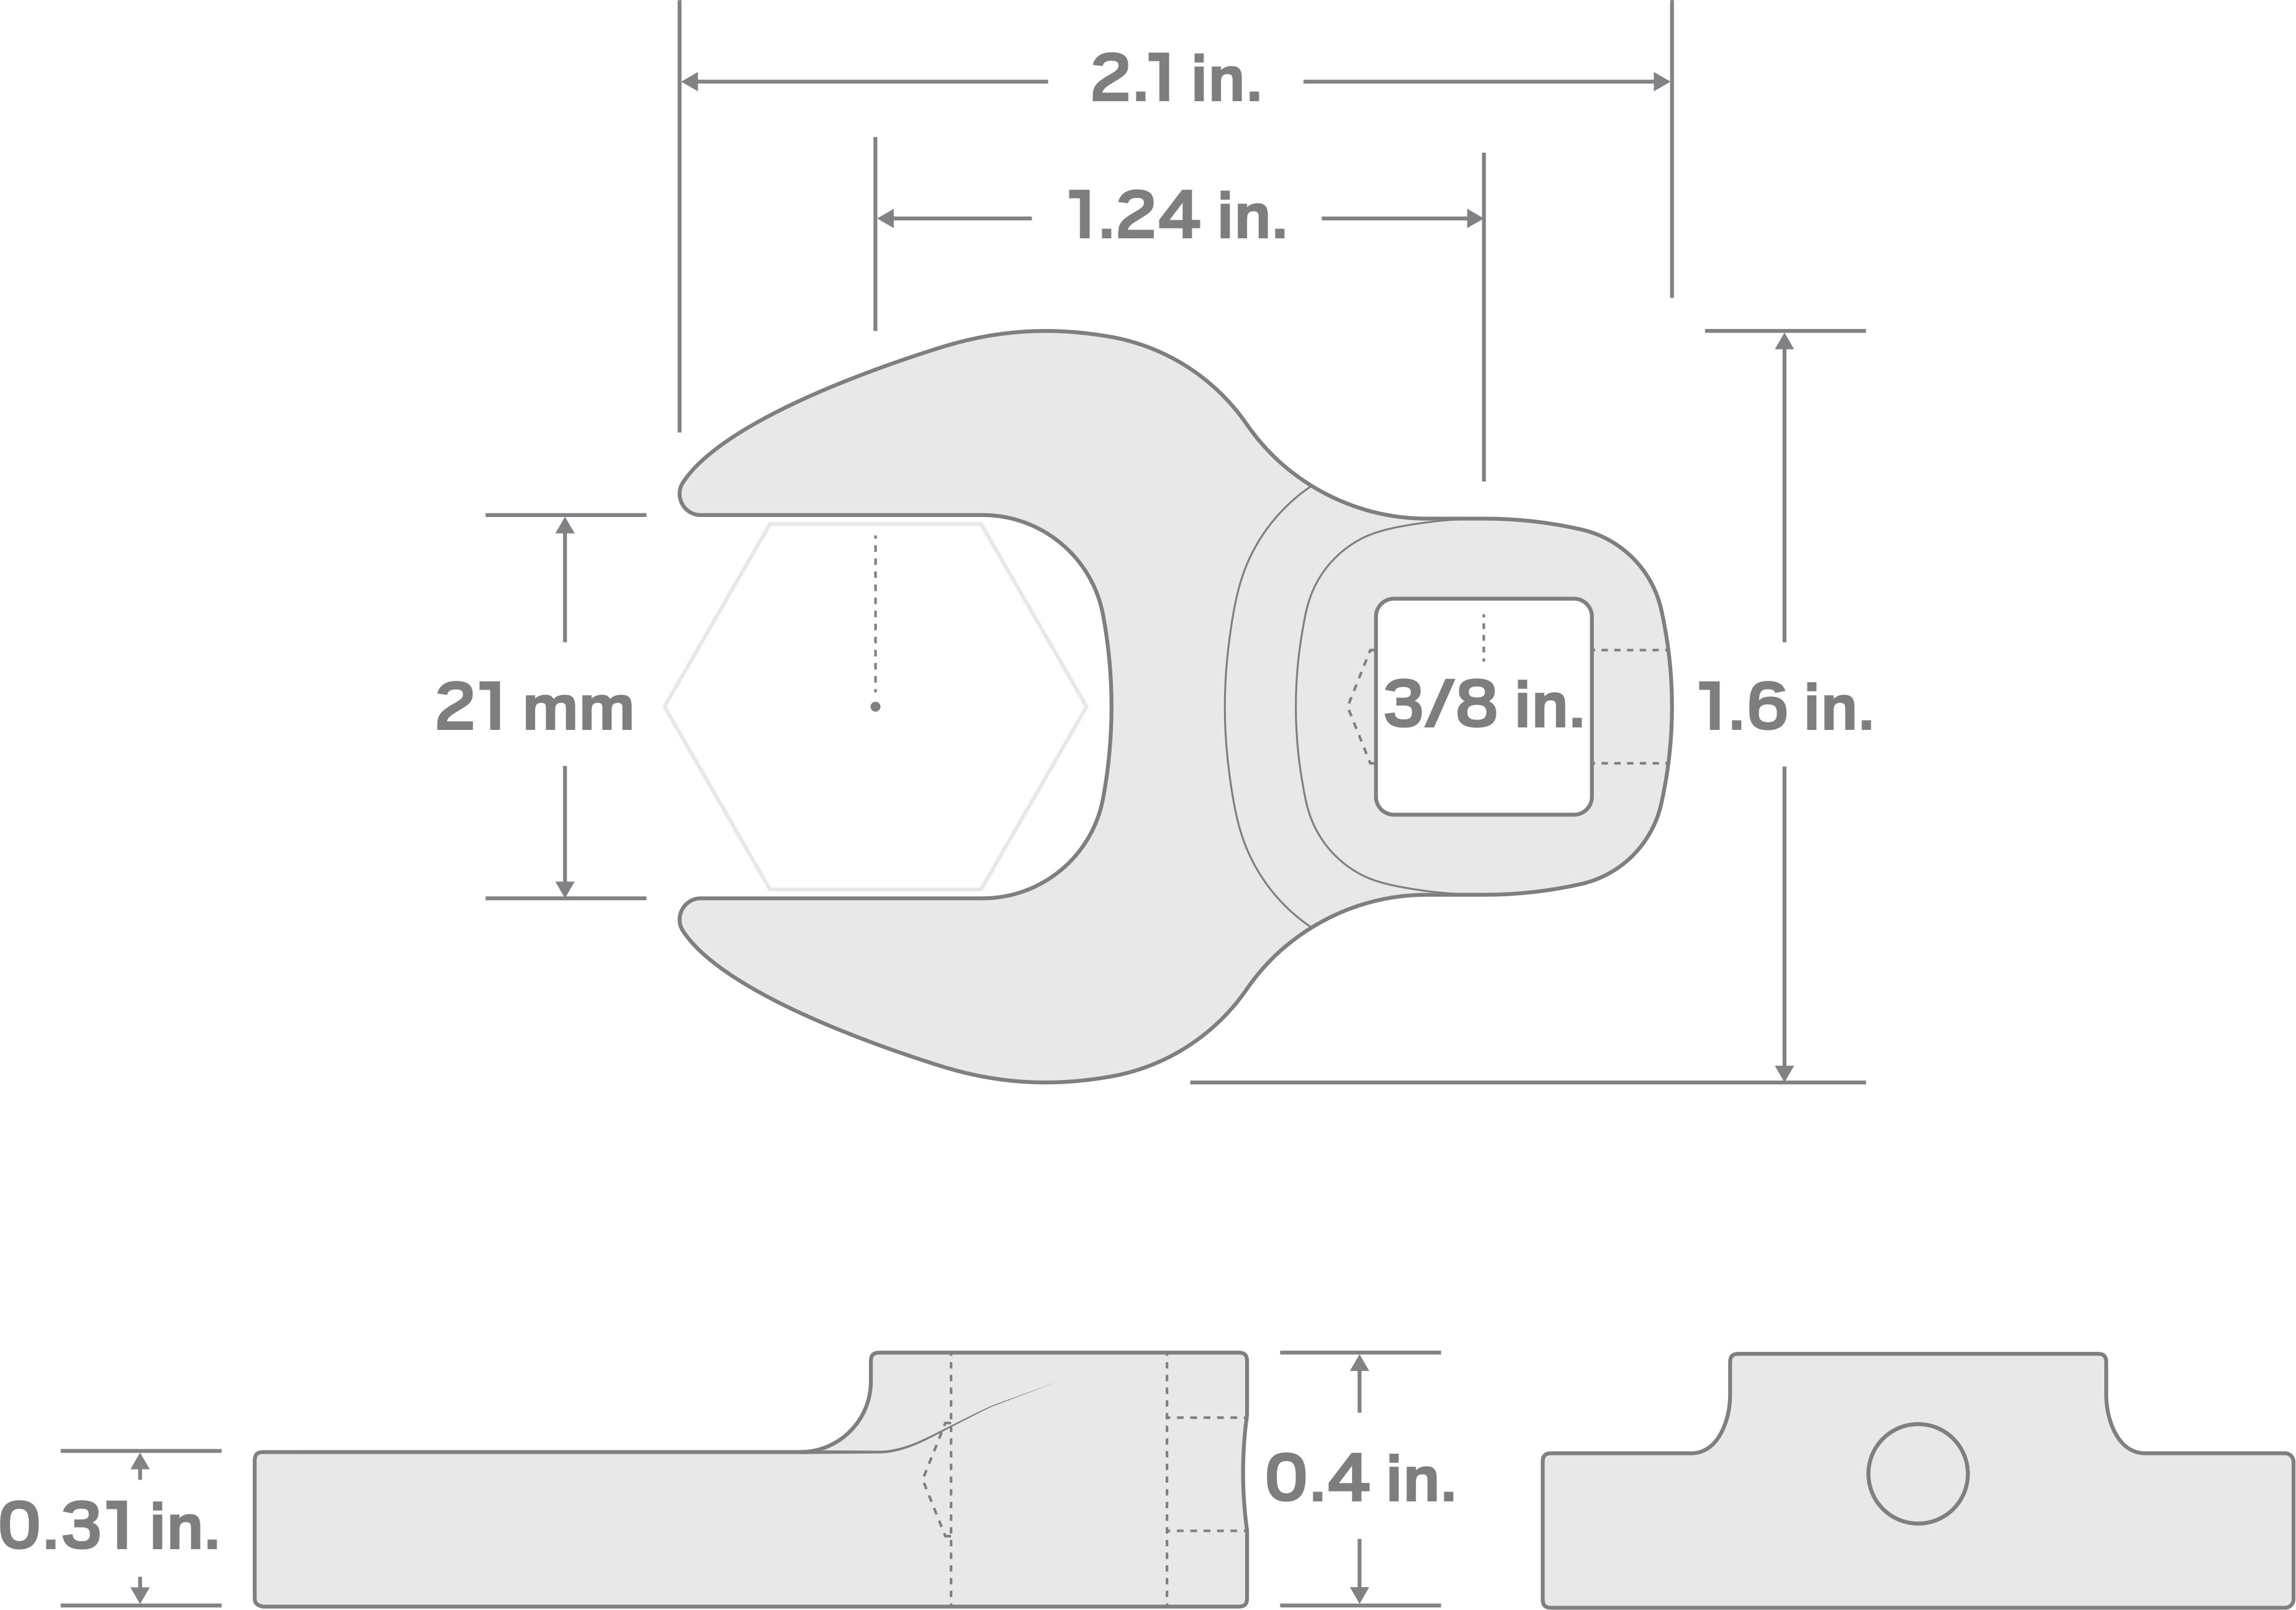 Specs for 3/8 Inch Drive x 21 mm Crowfoot Wrench